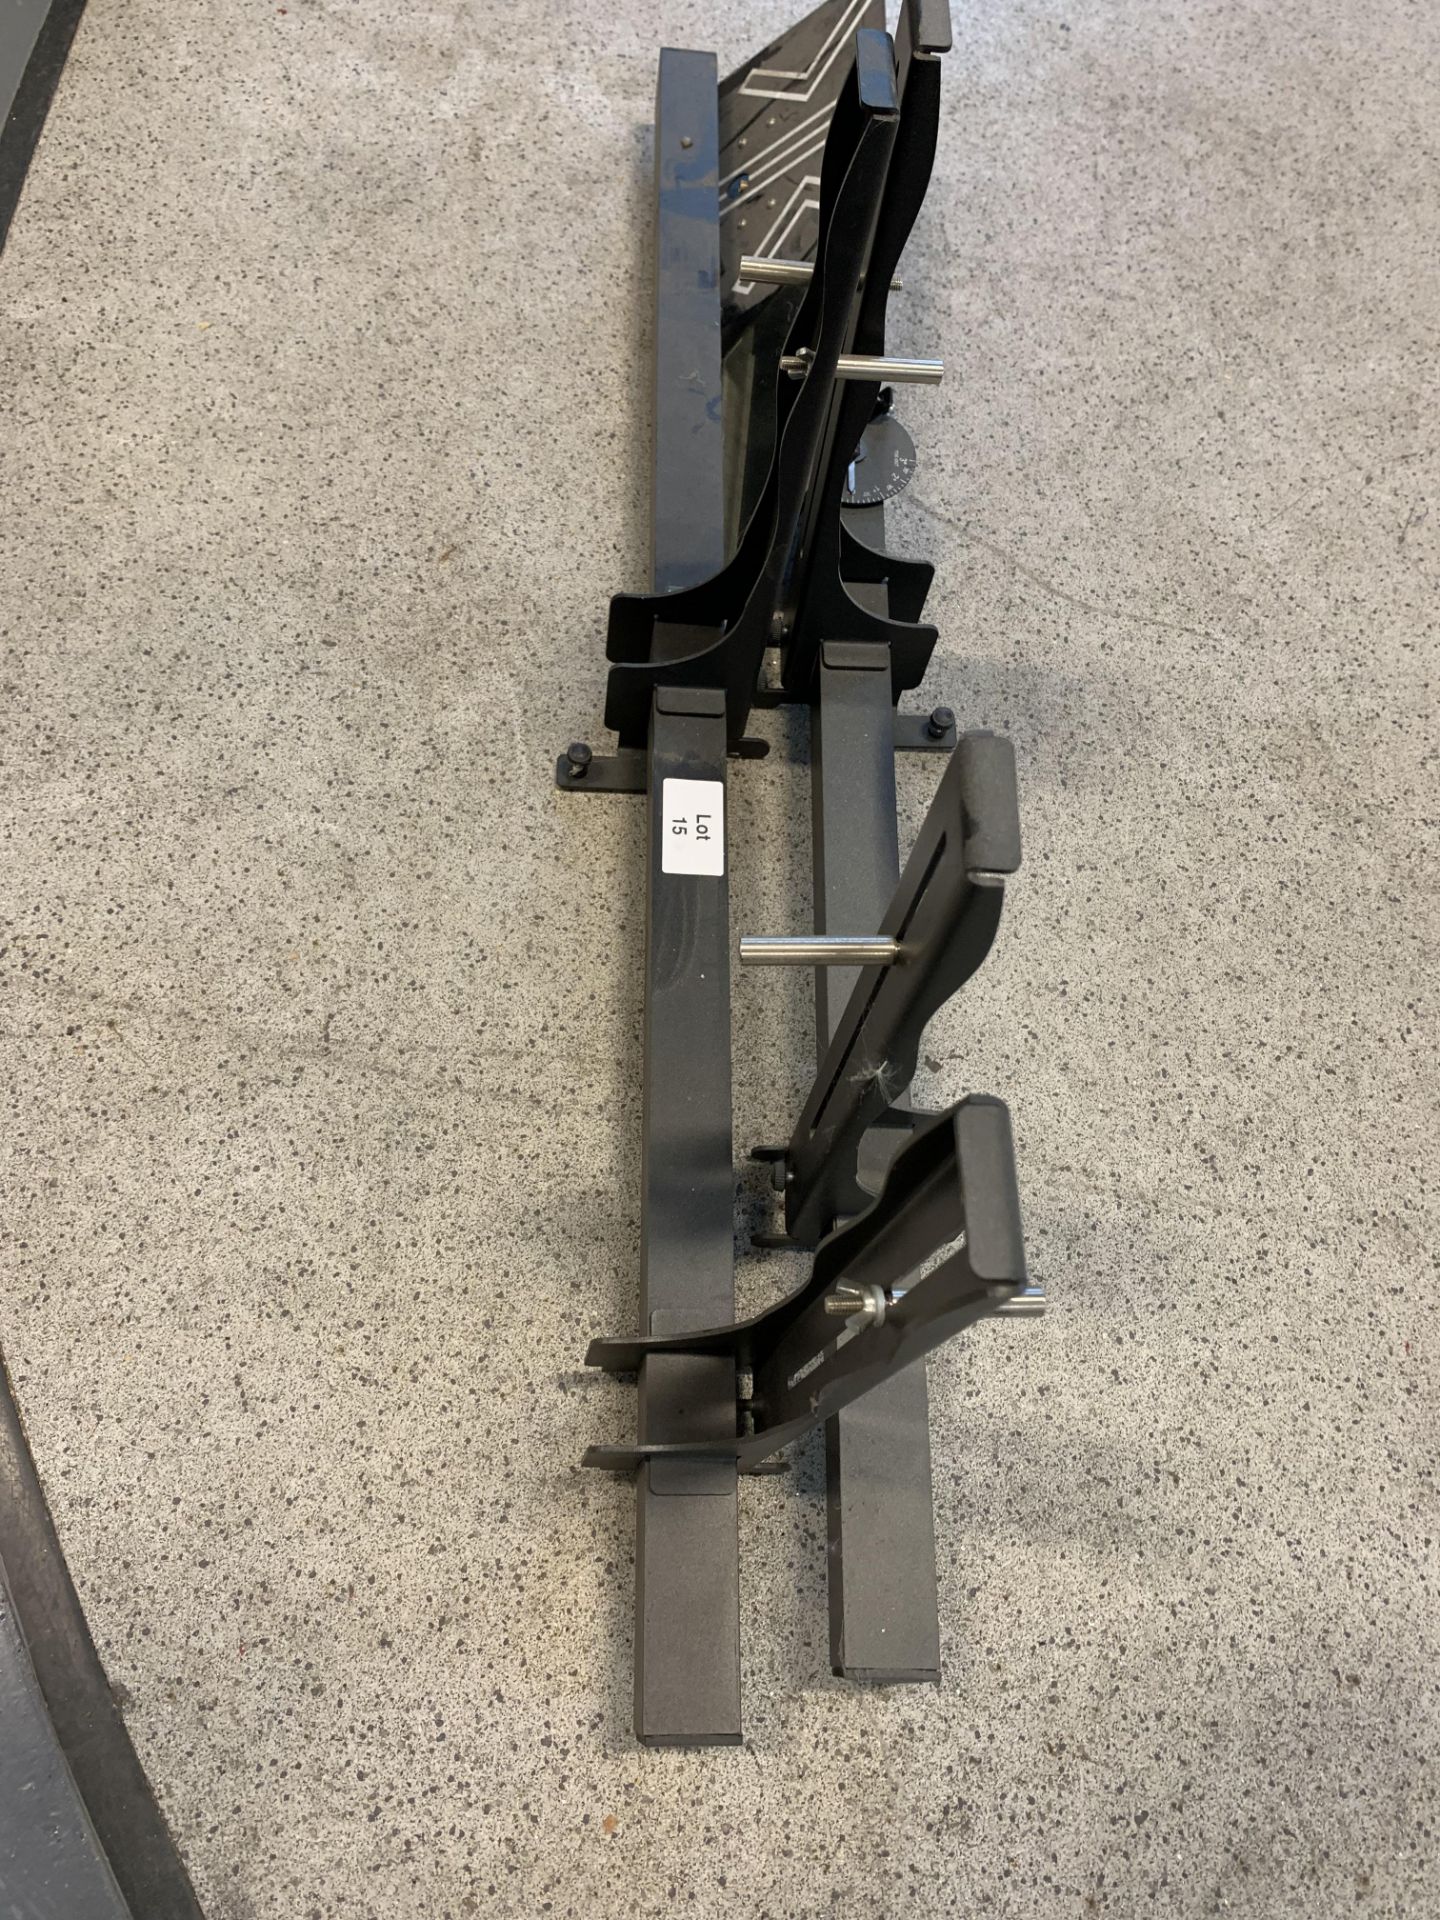 ﻿﻿Automotech alignment device - Image 2 of 3